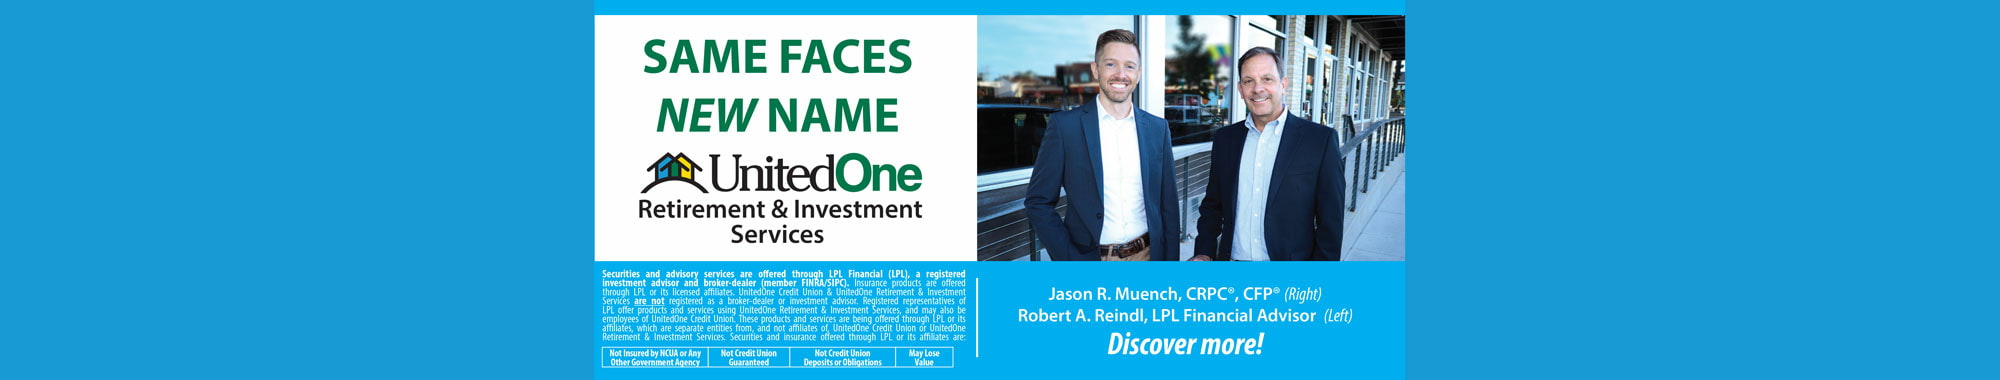 Same Faces. New Name. UnitedOne Retirement & Investment Services with Jason and Rob.